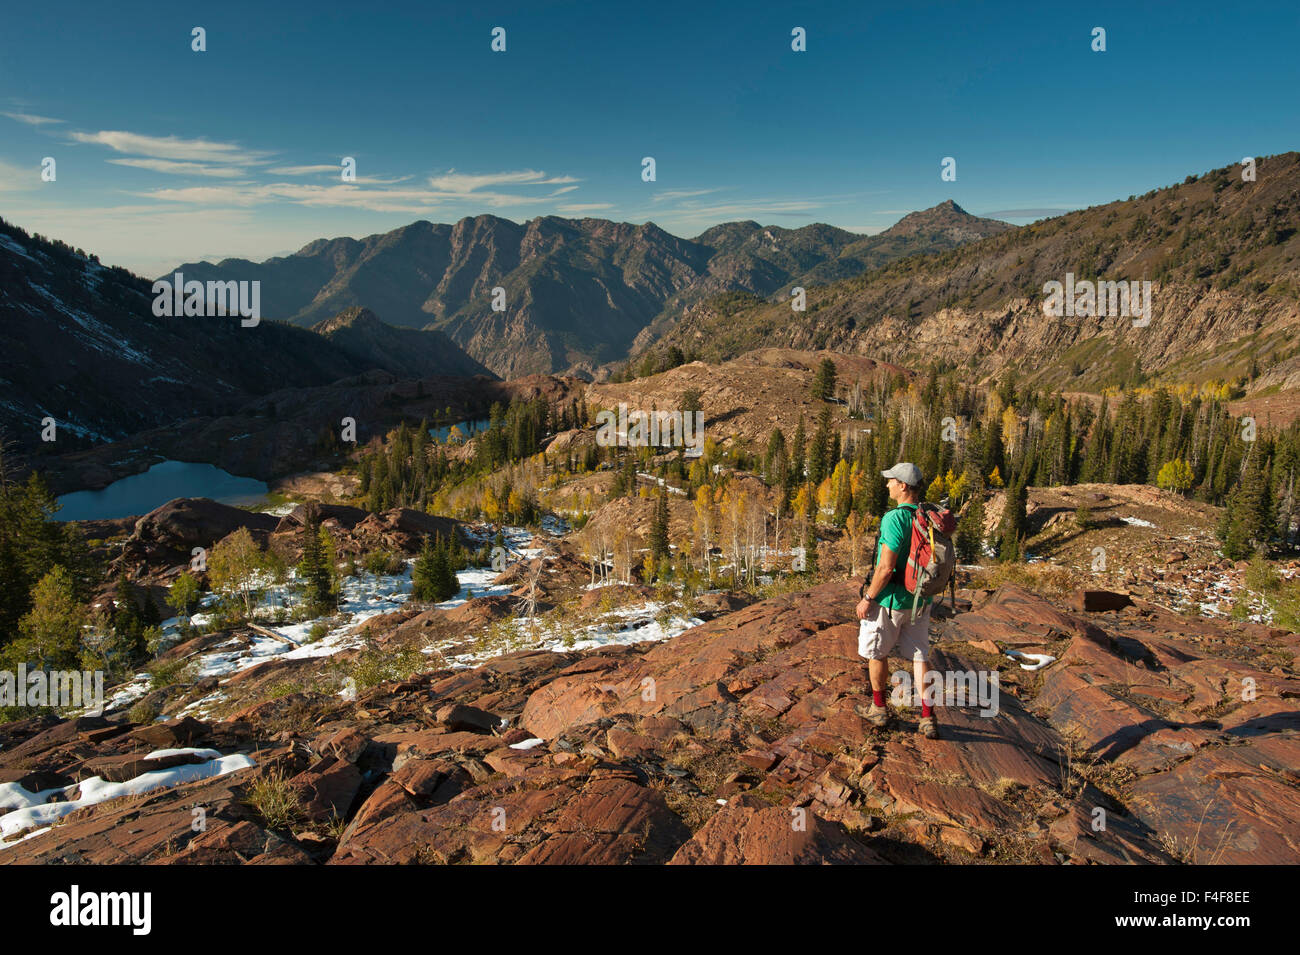 Hiking above Lake Lillian and Florence, Uintah-Wasatch-Cache National Forest, Lake Blanche Trail, Big Cottonwood Canyon, Wasatch Mountains near Salt Lake City, Utah (MR) Stock Photo